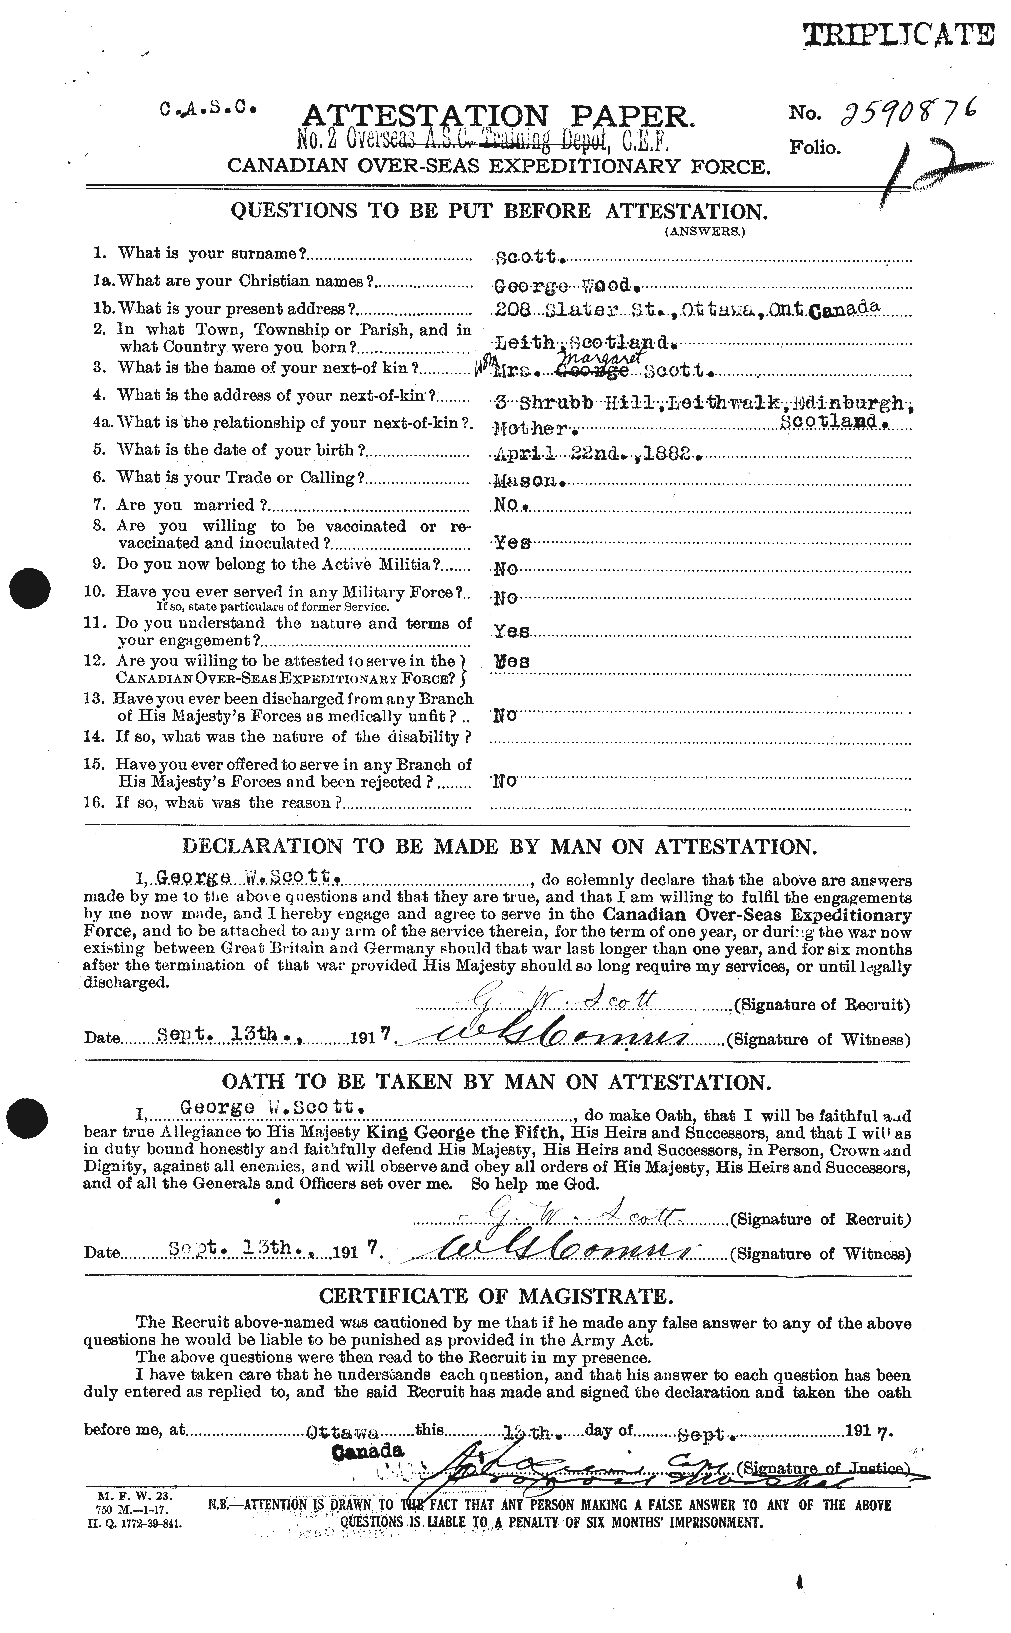 Personnel Records of the First World War - CEF 083127a